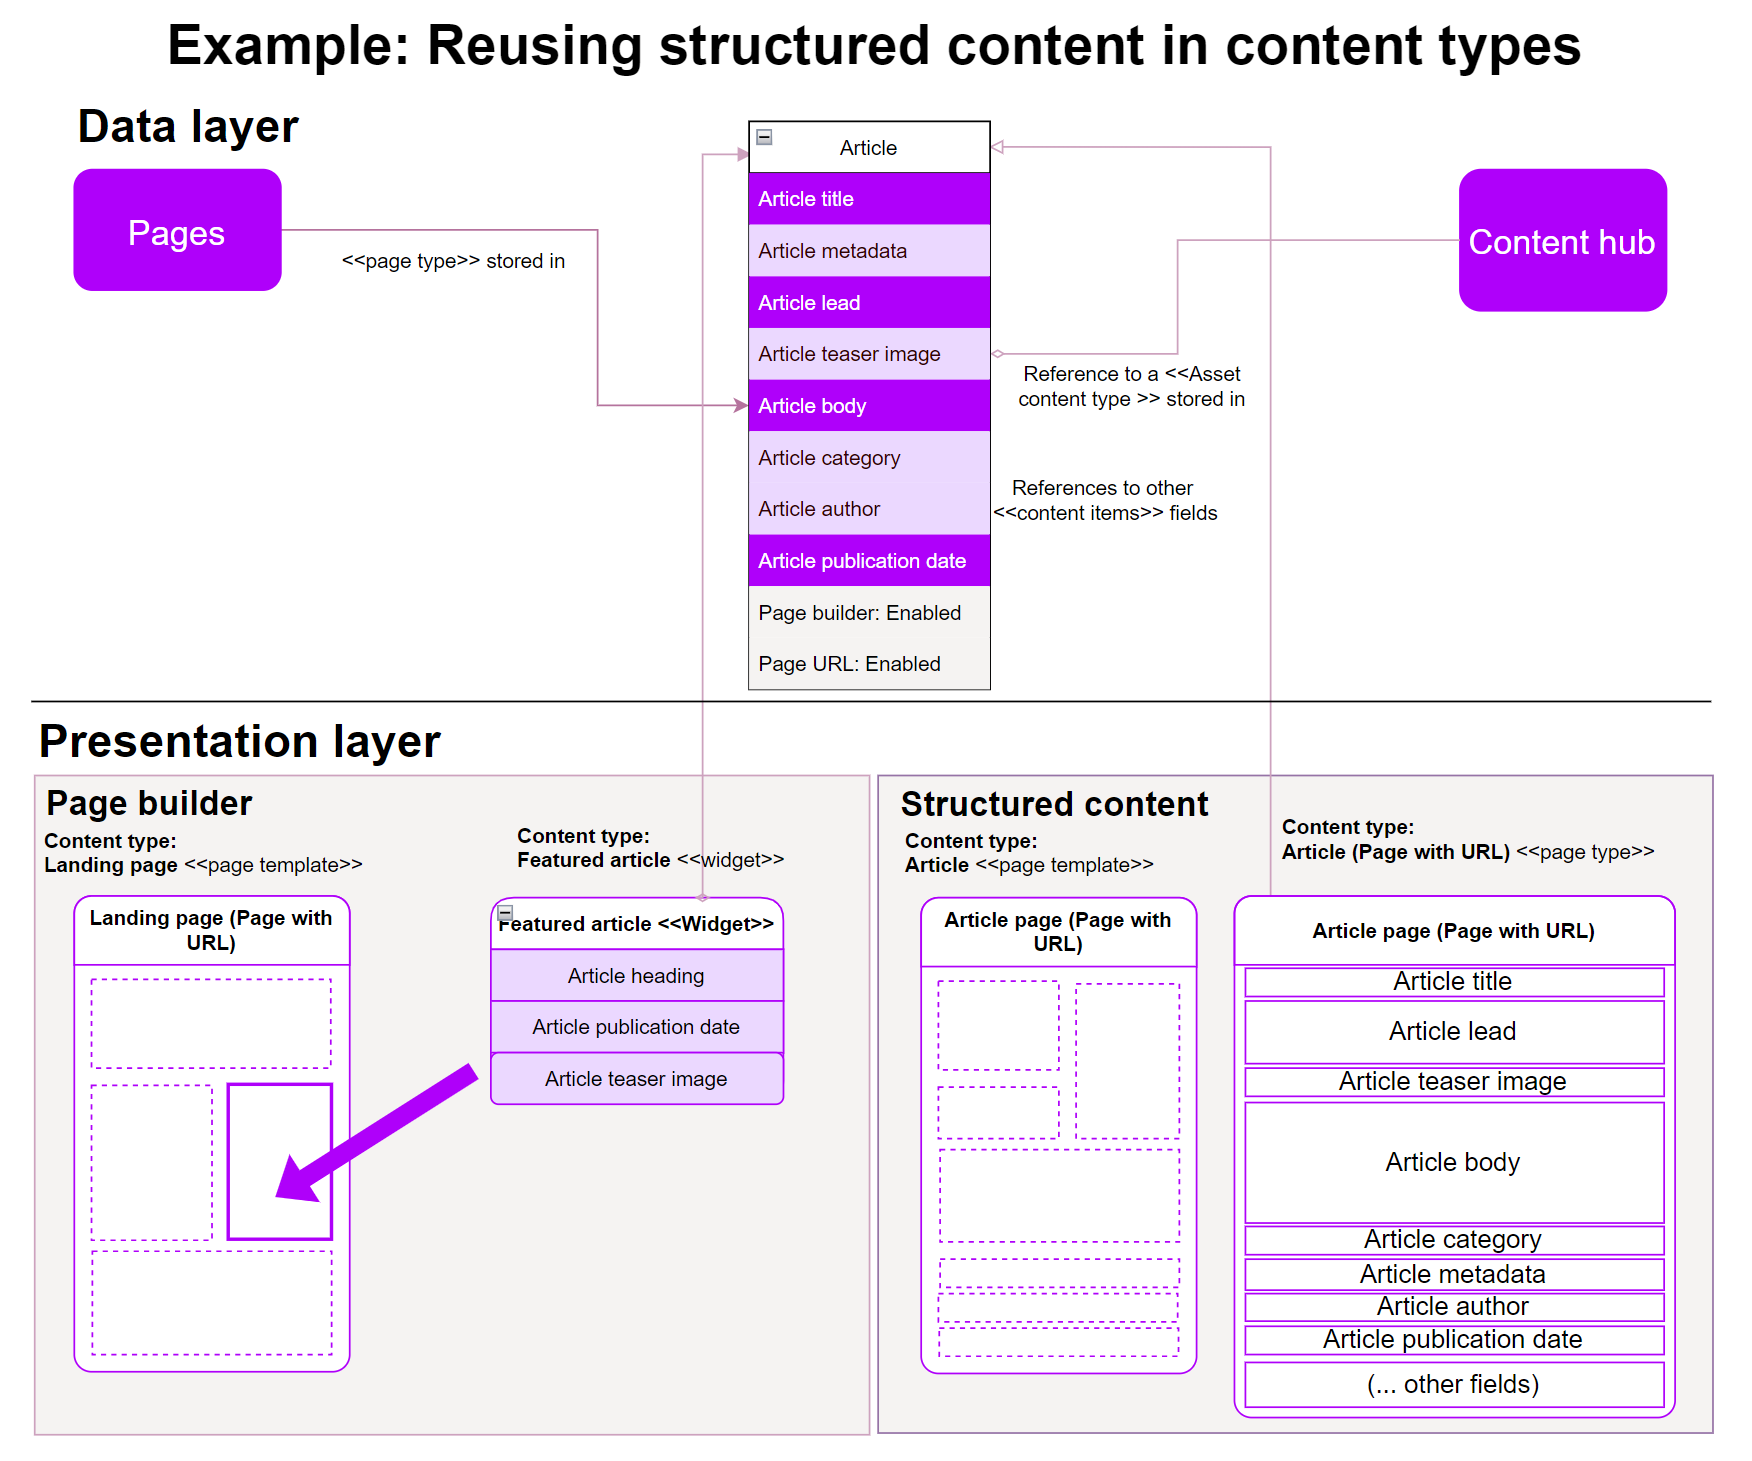 Structured content reuse example